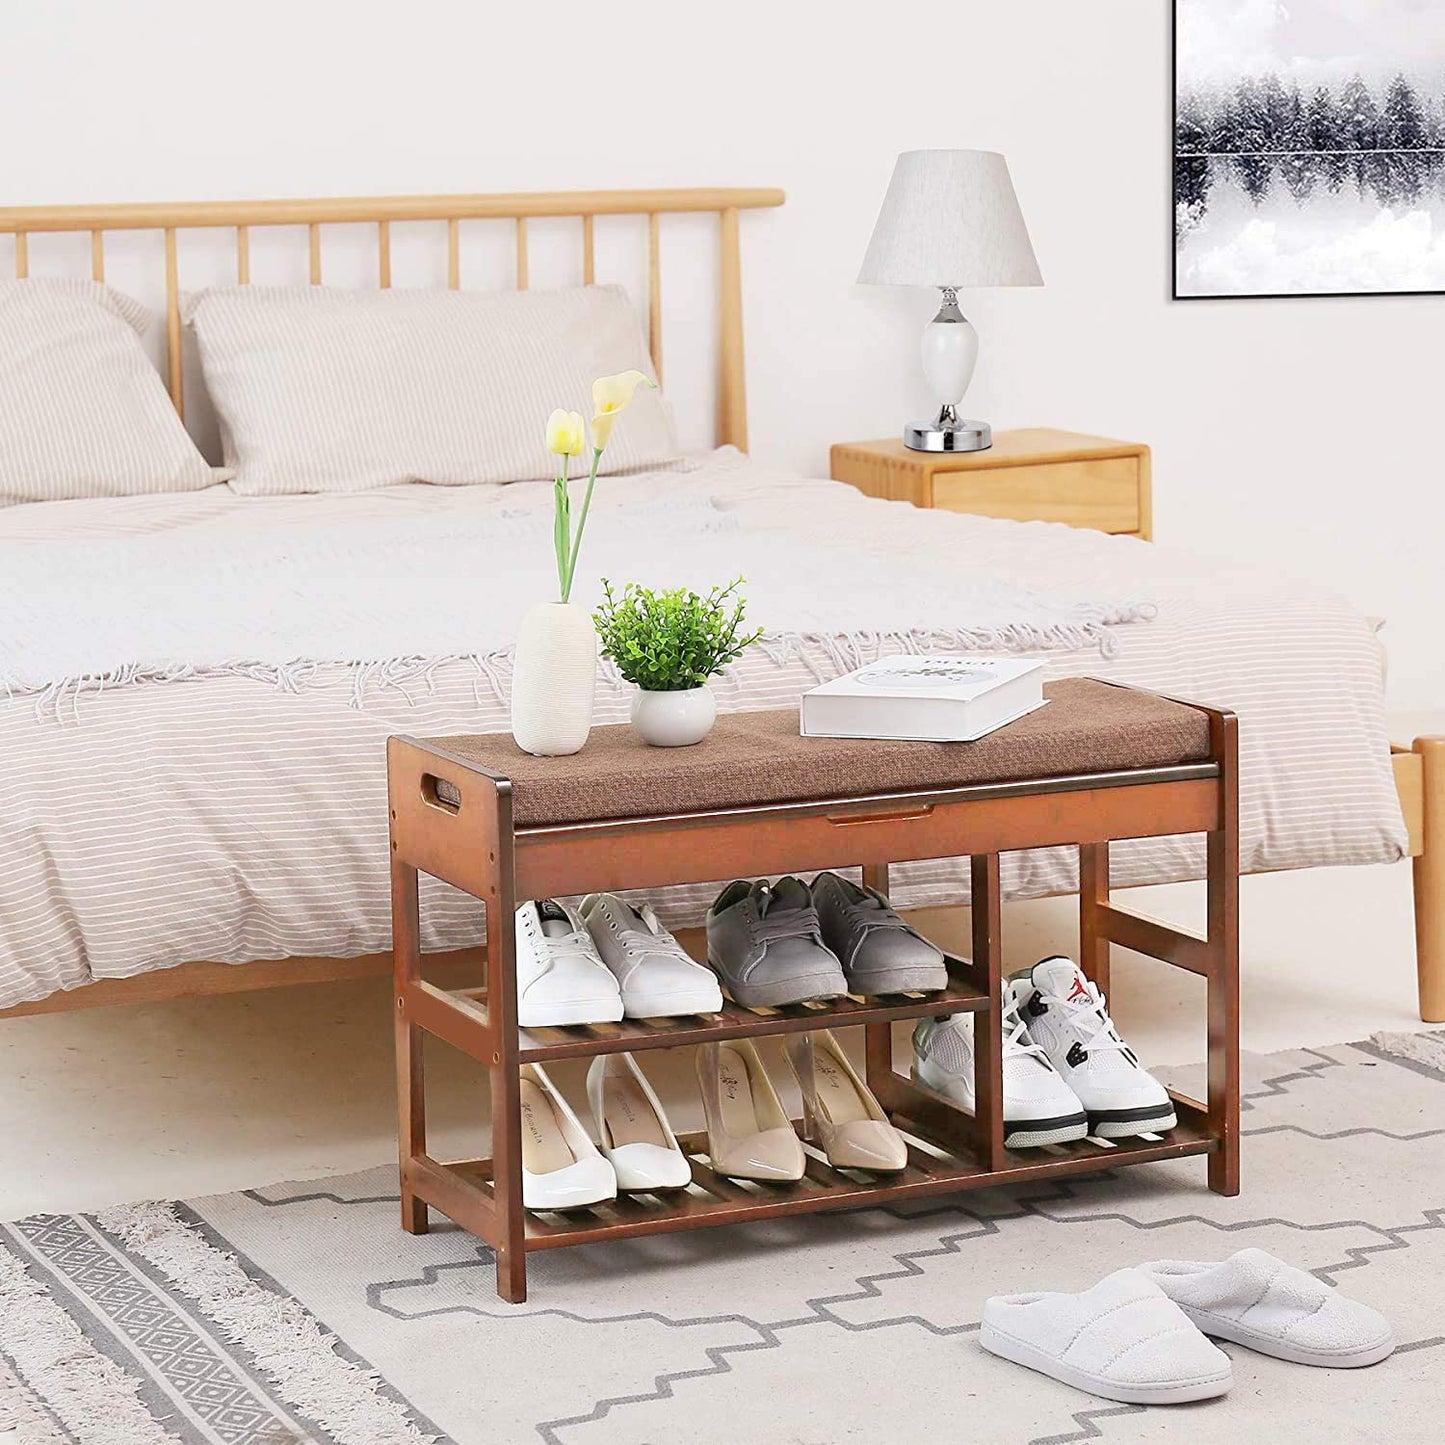 Benches  Storage Shelf with Cushion for Boots, Modern Stool for Bedroom Living Room